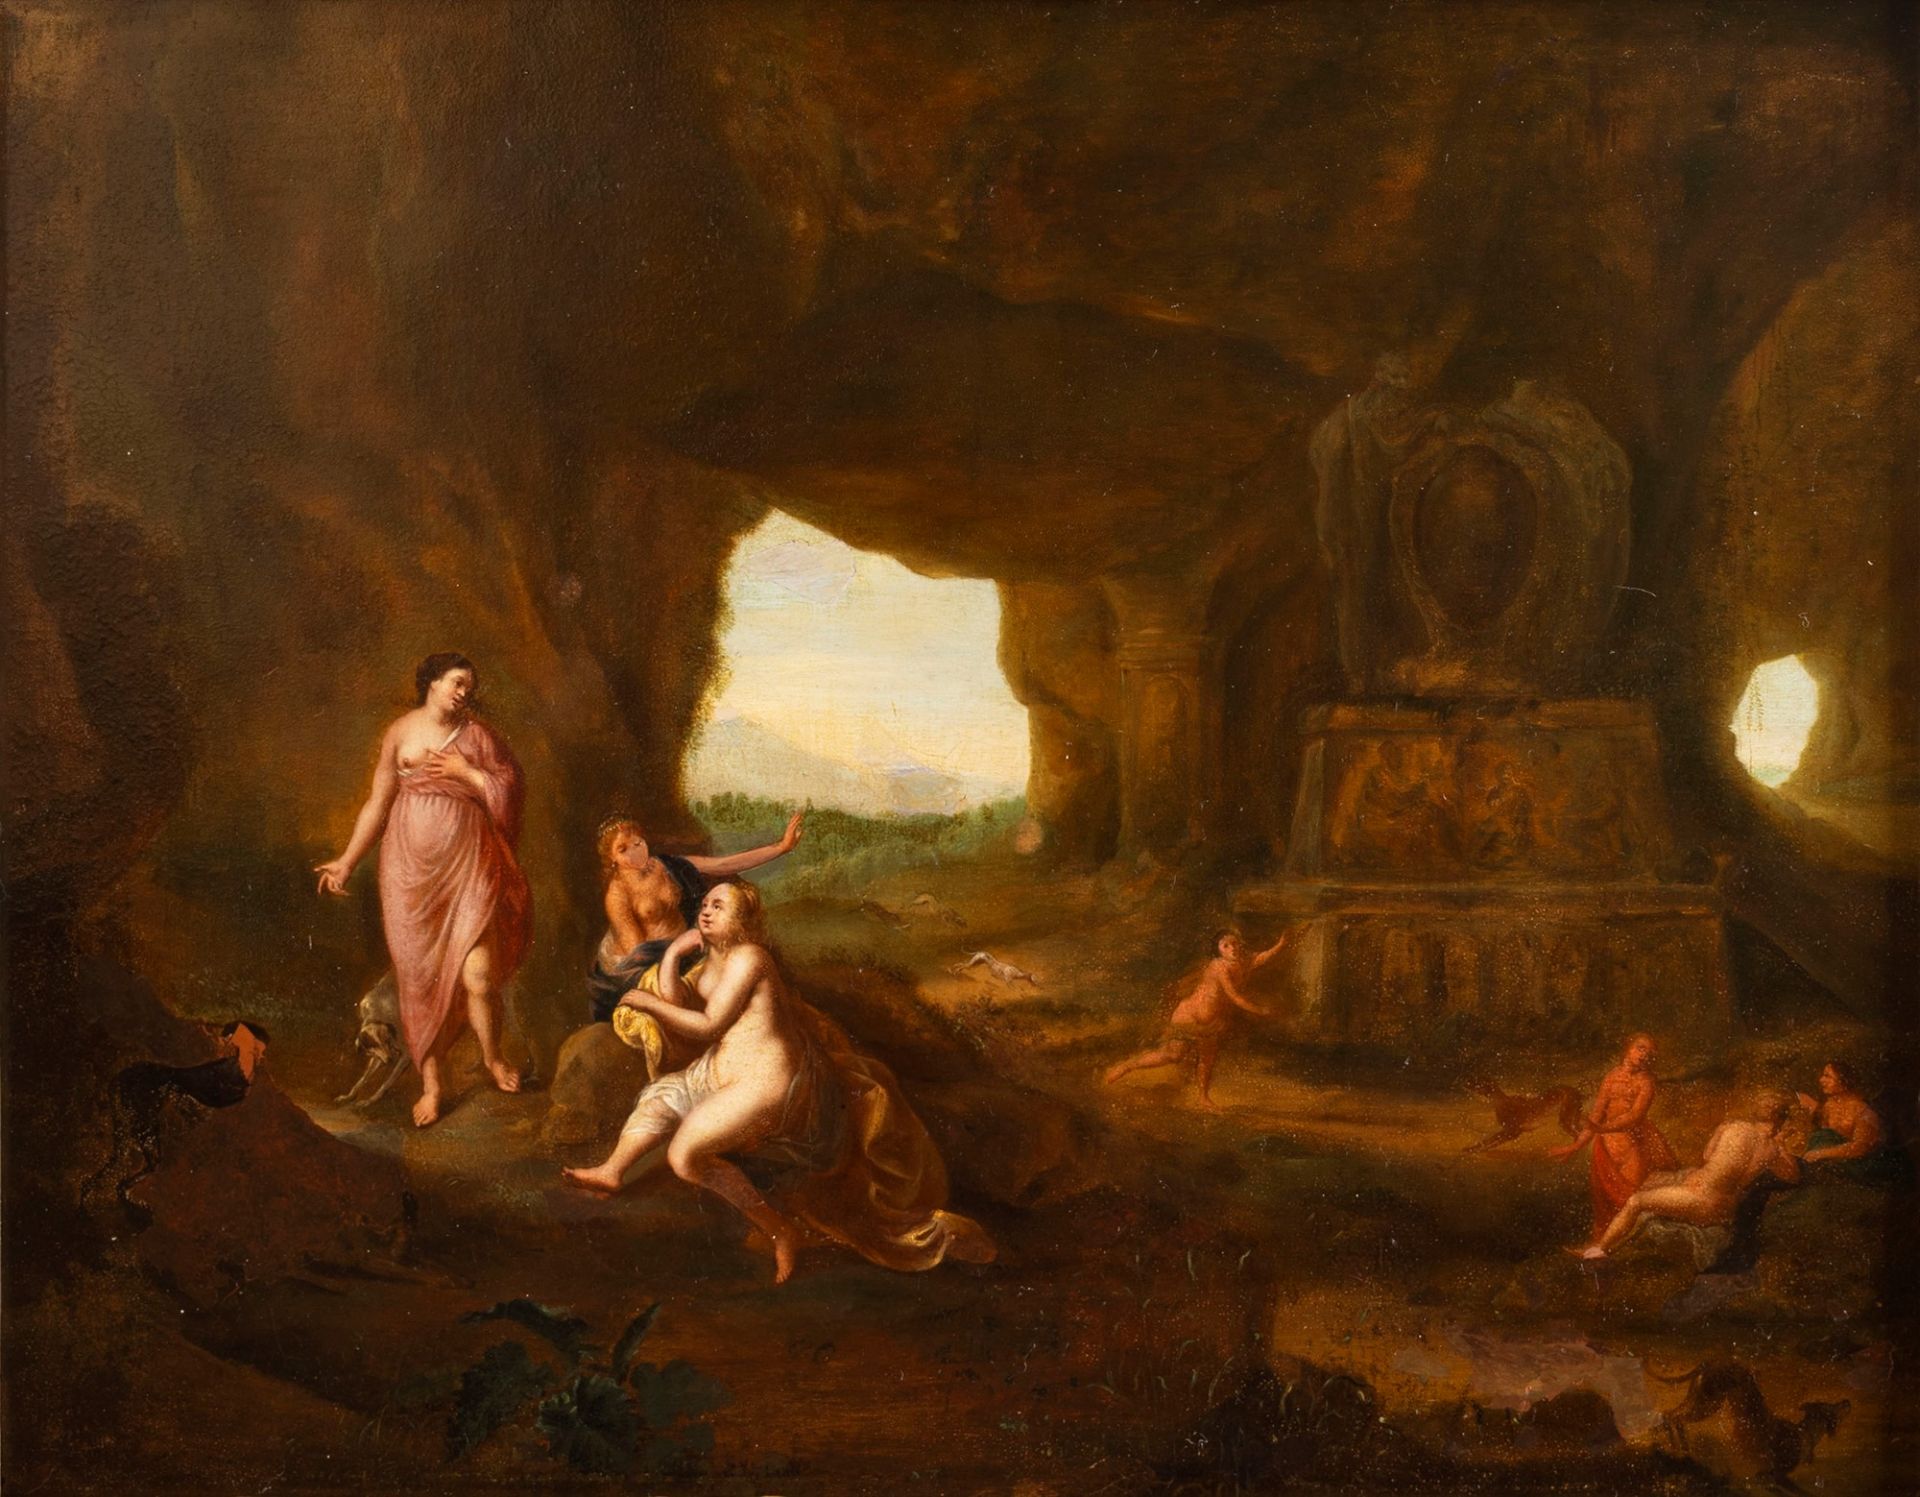 Abraham van Cuylenborch (Utrecht 1620-1658) - Diana and Actaeon at a cave with classical ruins